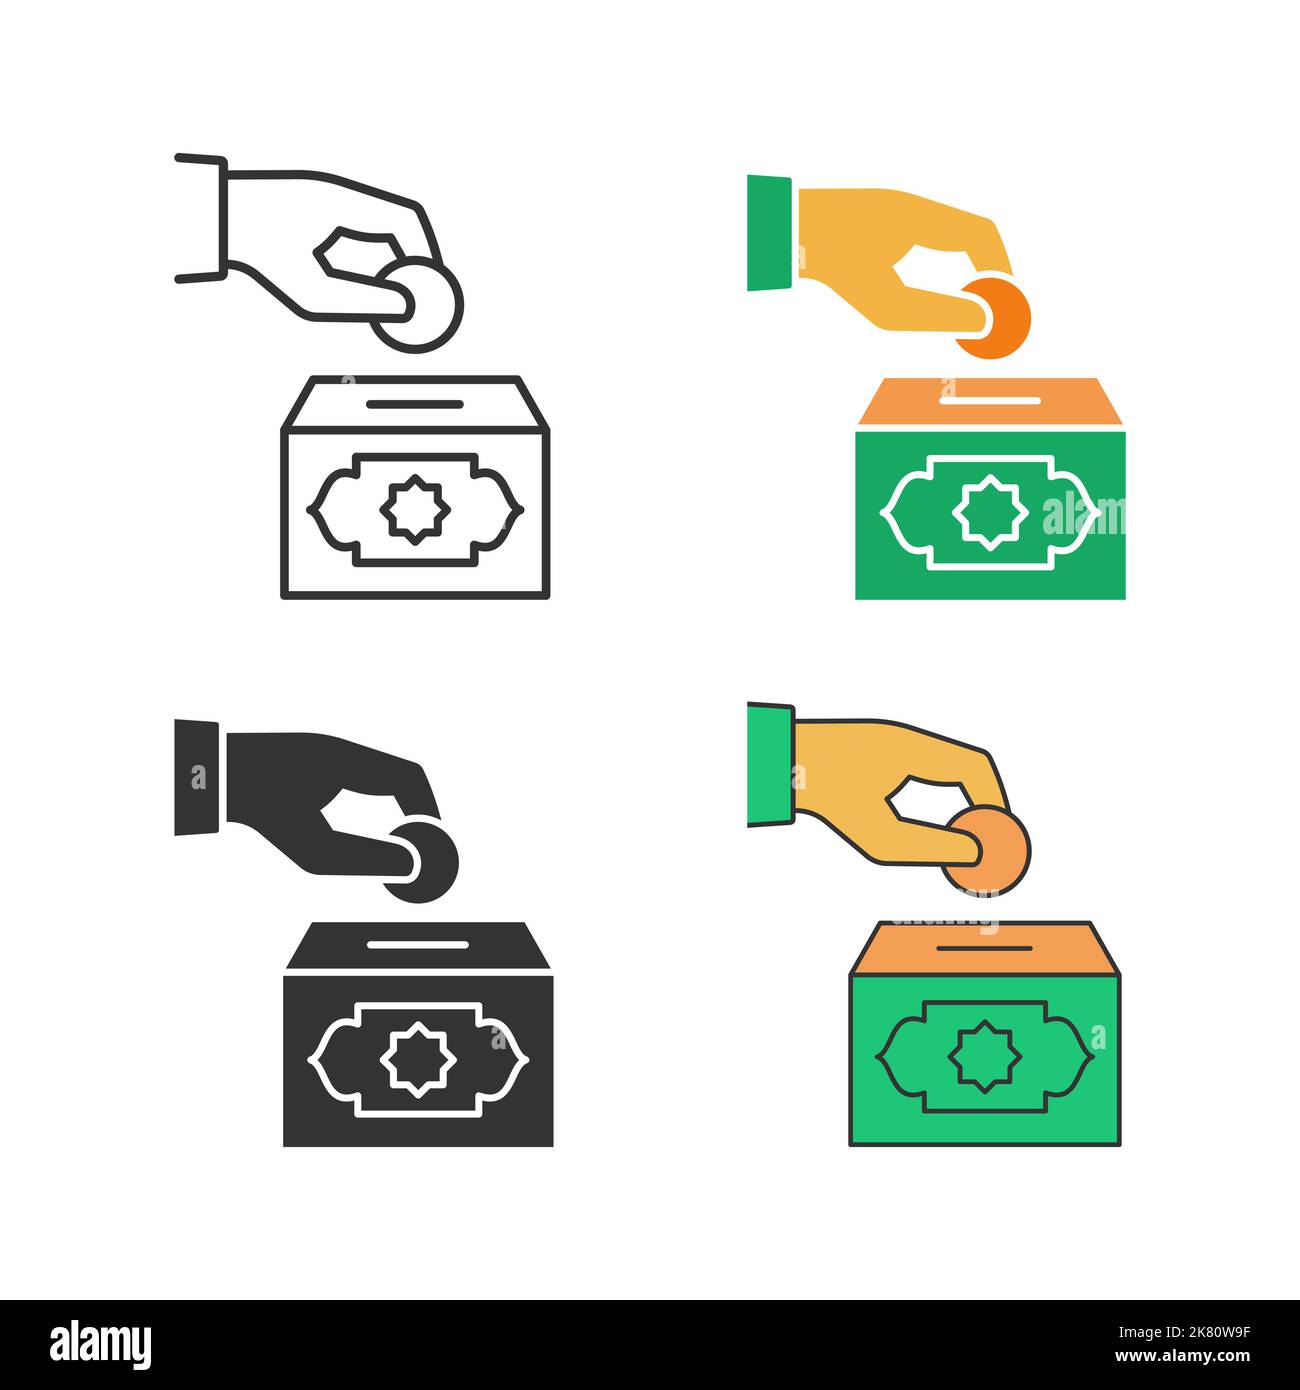 Zakat with money vector icons. Symbol of islamic charity, donate, helping. Vector illustration. Stock Vector